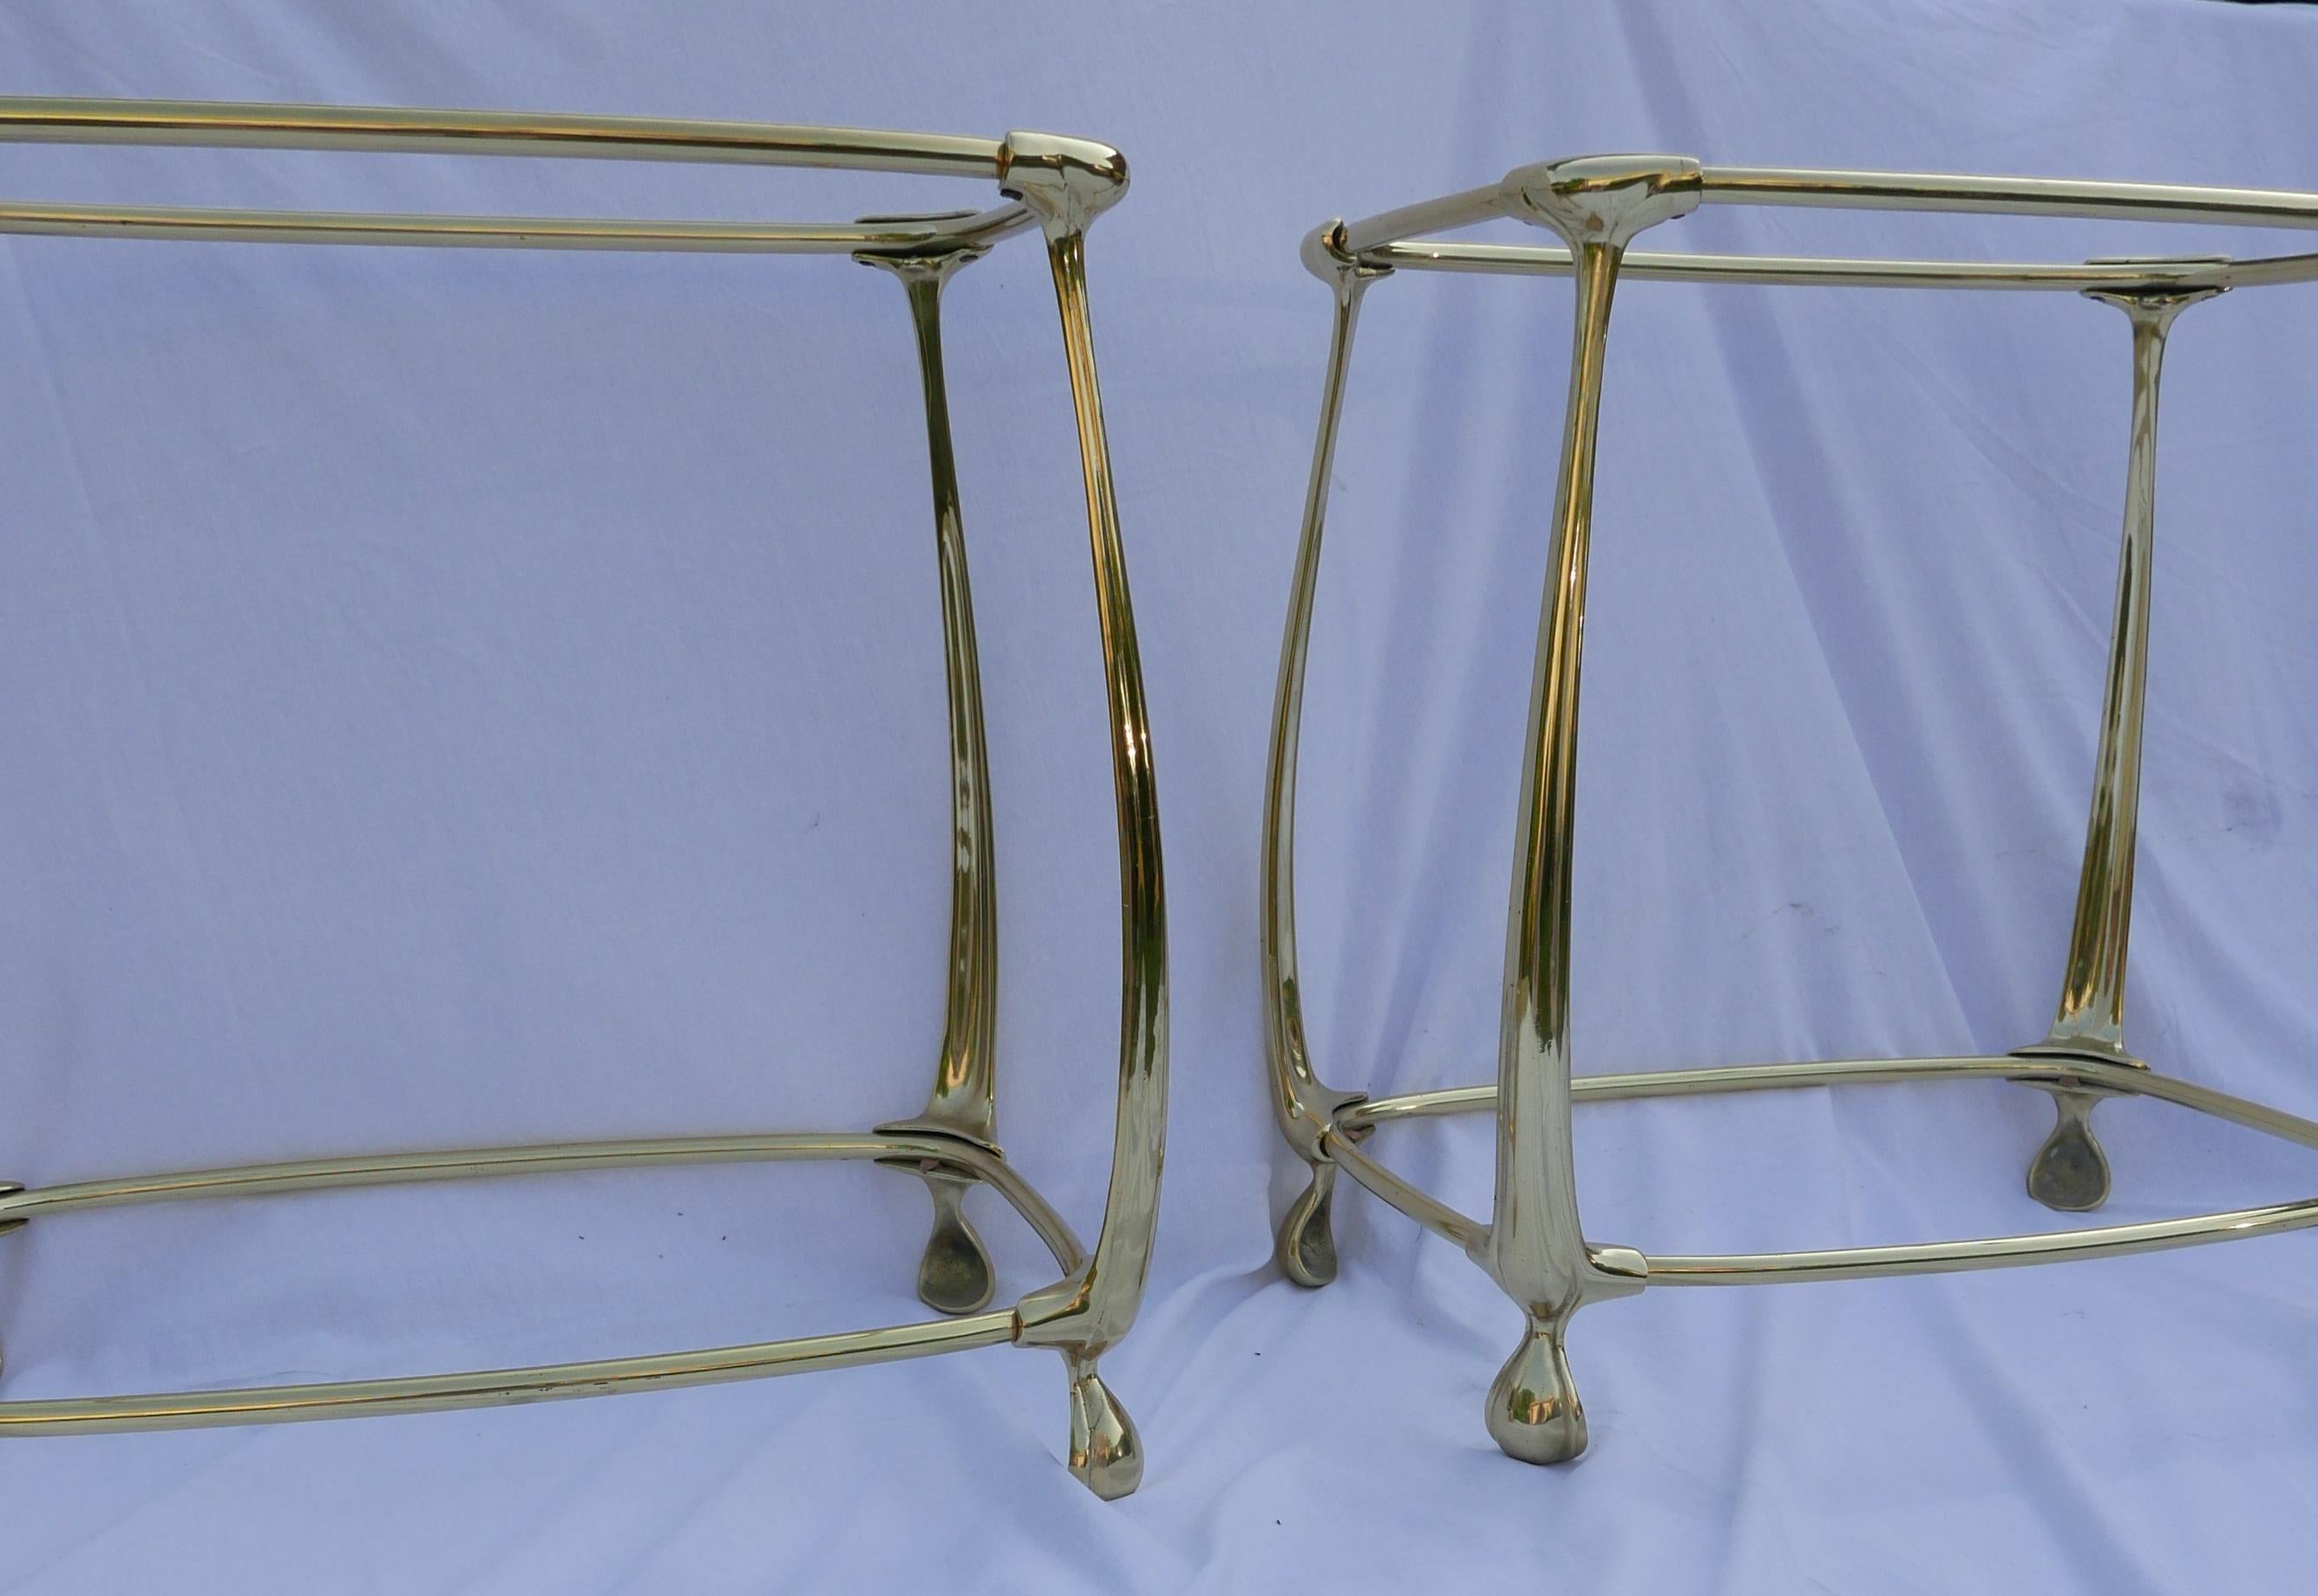 1970-1980 Pair of Gilt Bronze Tables with 2 Levels in the Style of Art Nouveau  For Sale 5